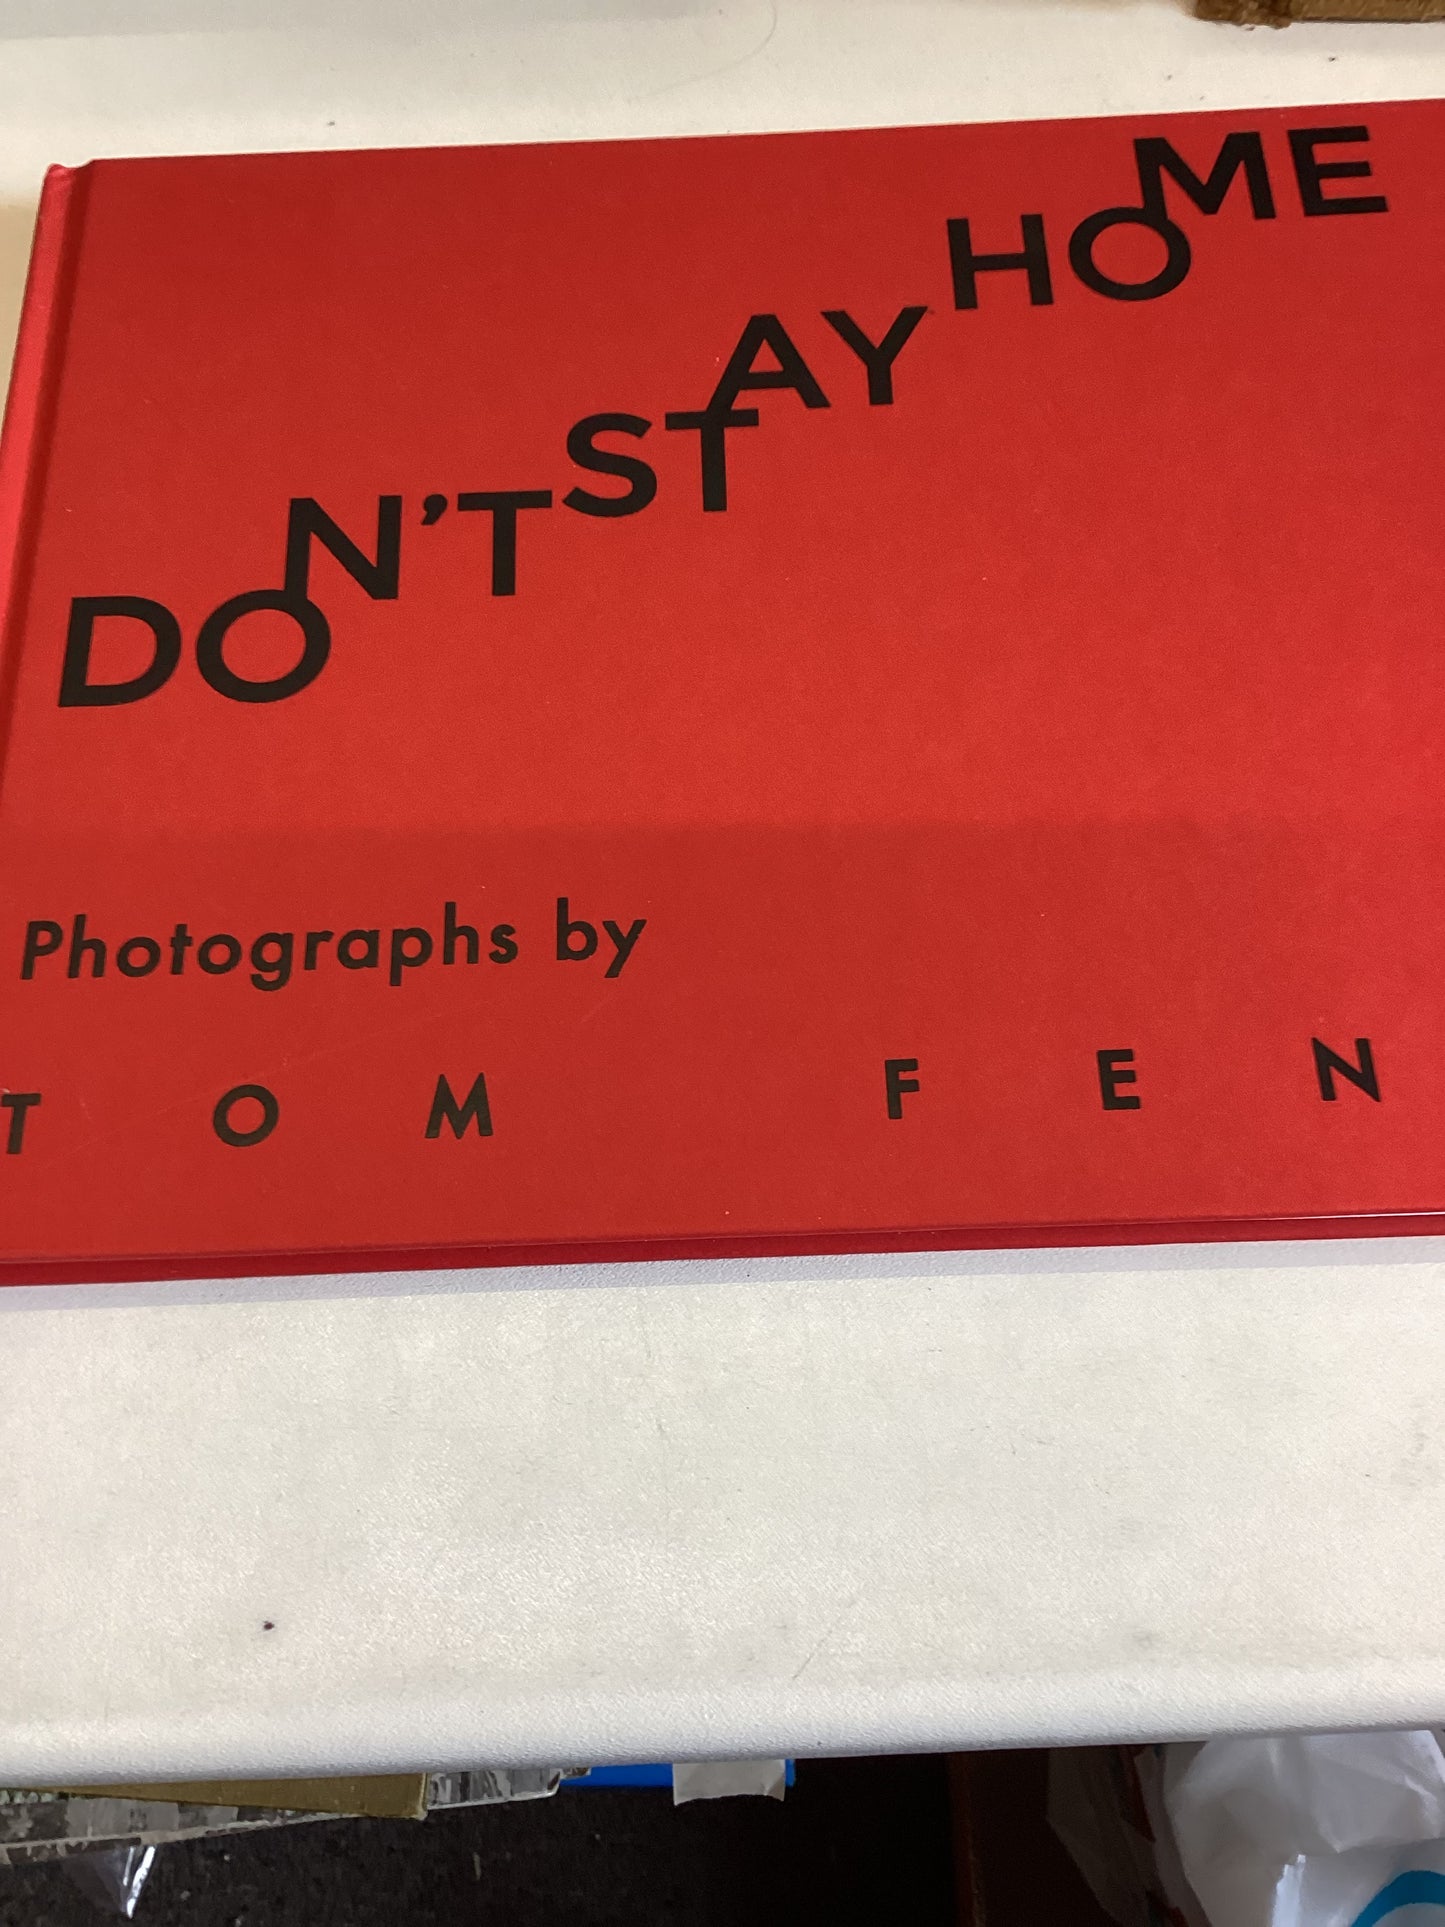 Don't Stay Home Photographs by Tom Fenn